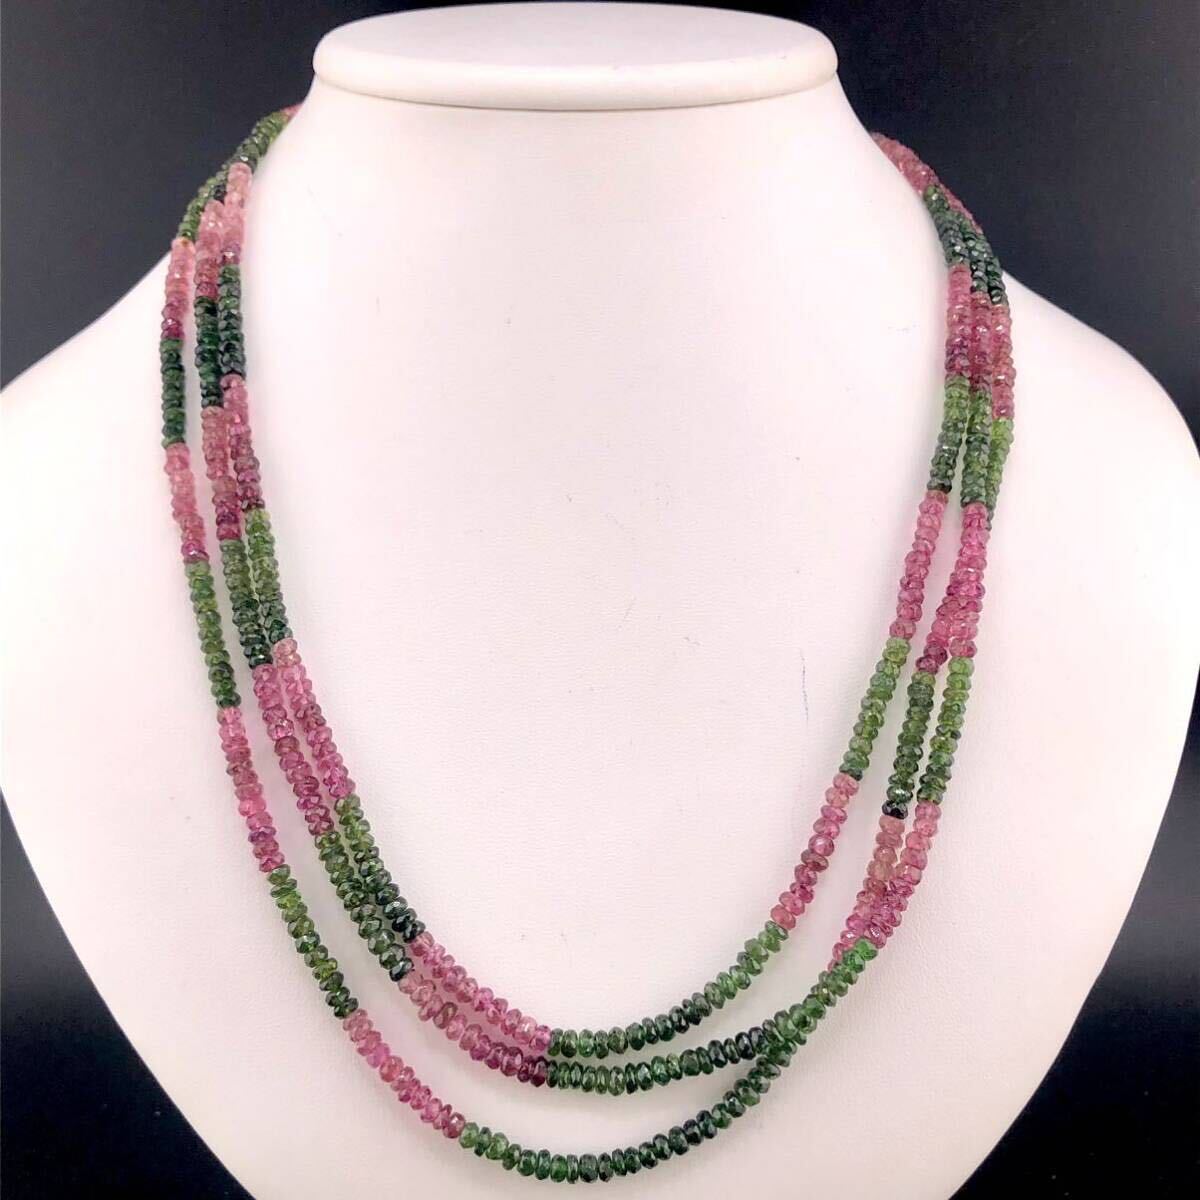 E03-7074 3連☆トルマリンネックレス 約52cm 45g ( tourmaline necklace SILVER jewelry )_画像2